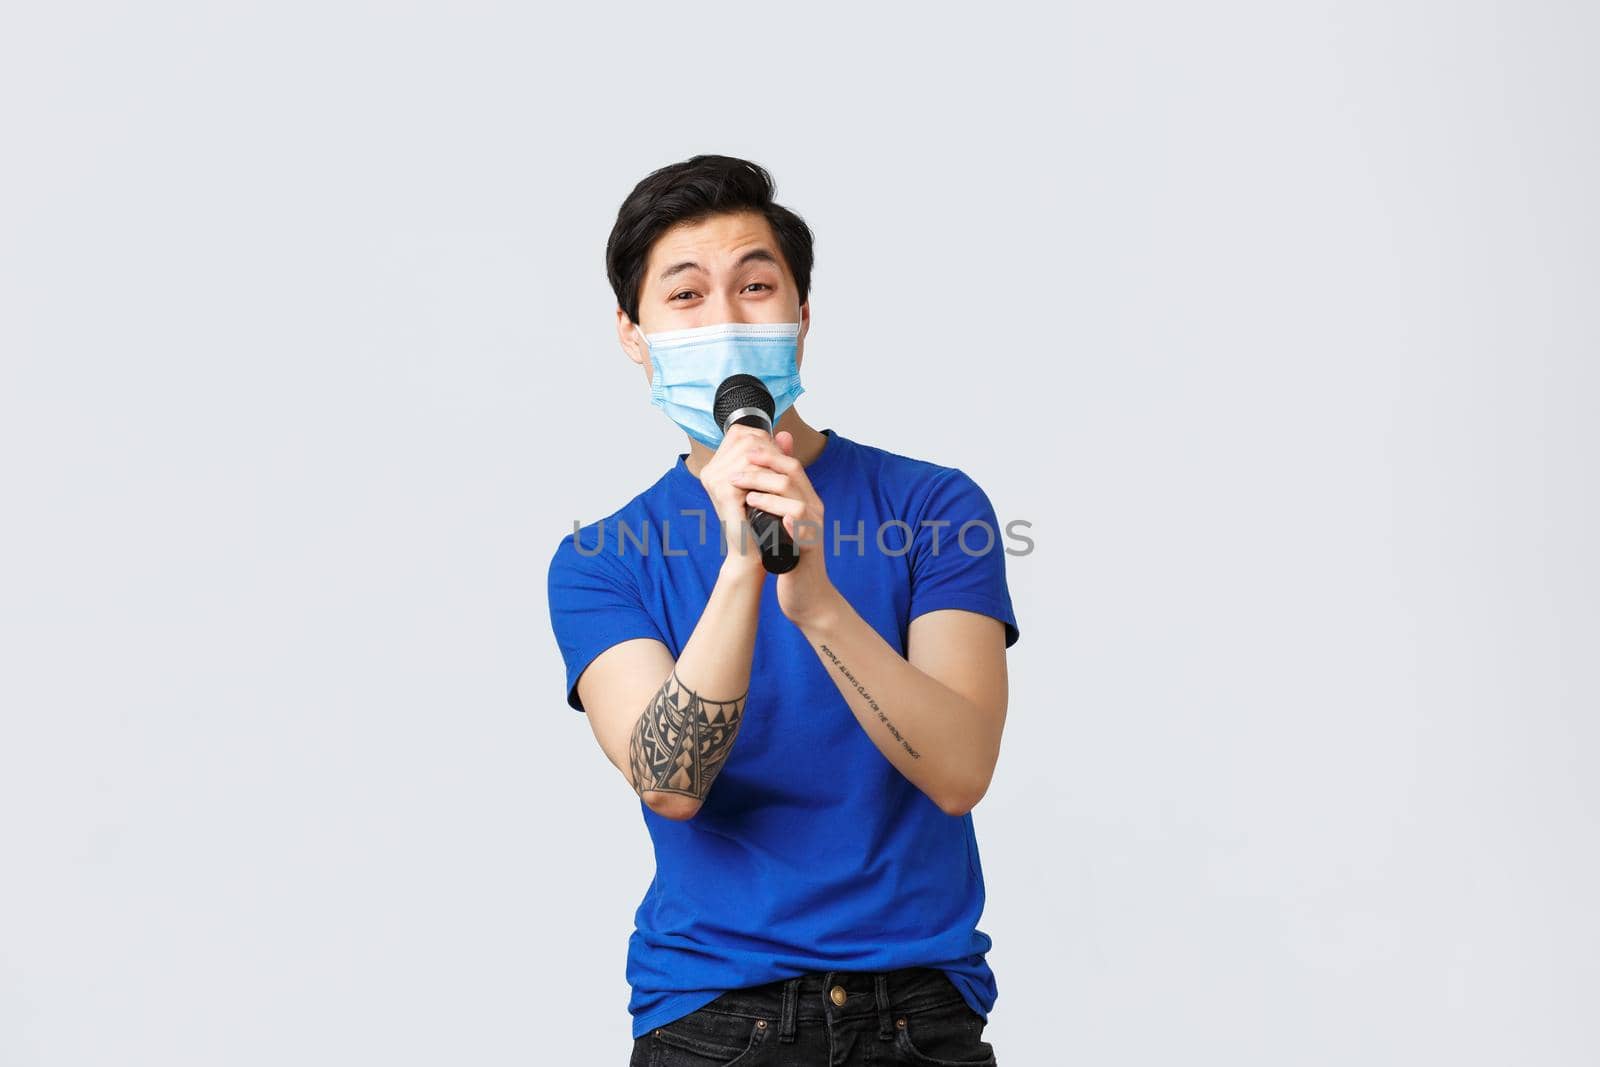 Covid-19 lifestyle, people emotions and leisure on quarantine concept. Handsome happy and carefree chinese guy having fun at karaoke, singing song in microphone, wearing medical mask.